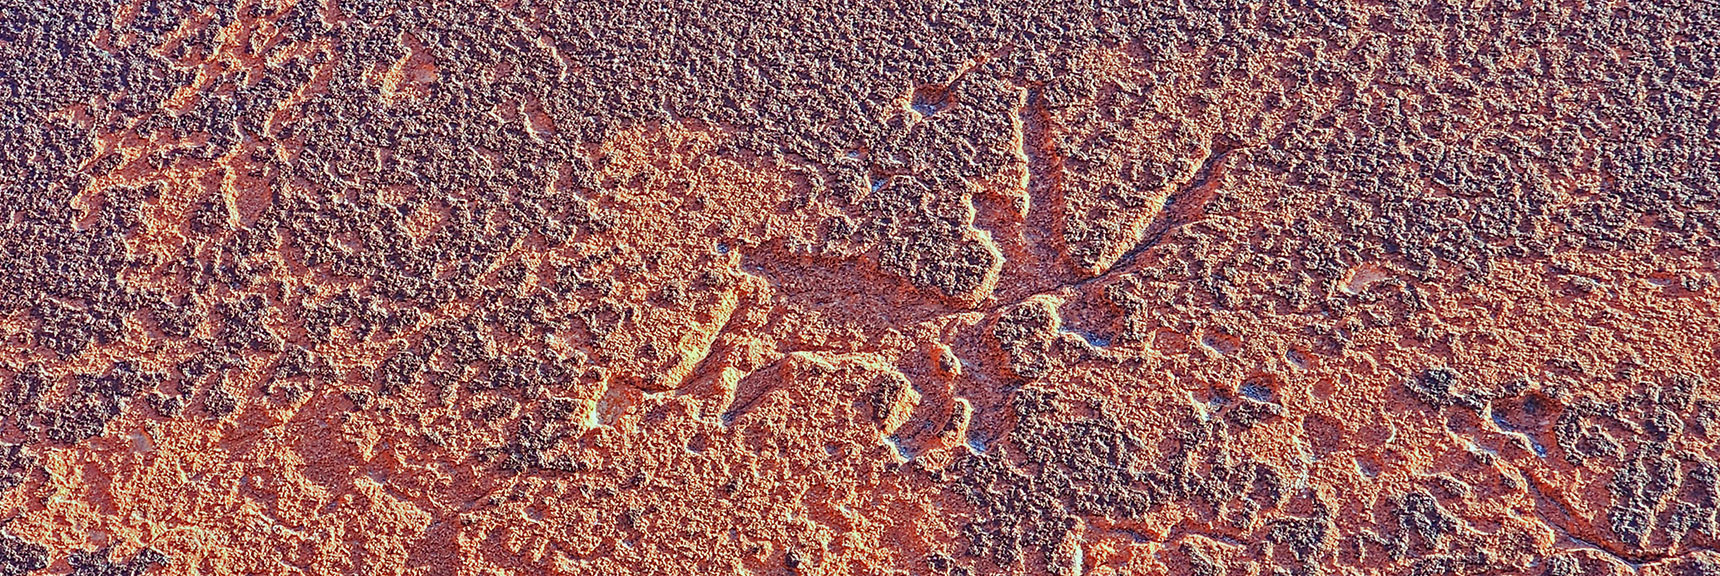 Antelope Petroglyph | Upper Calico Hills Loop | Calico Basin and Red Rock Canyon, Nevada